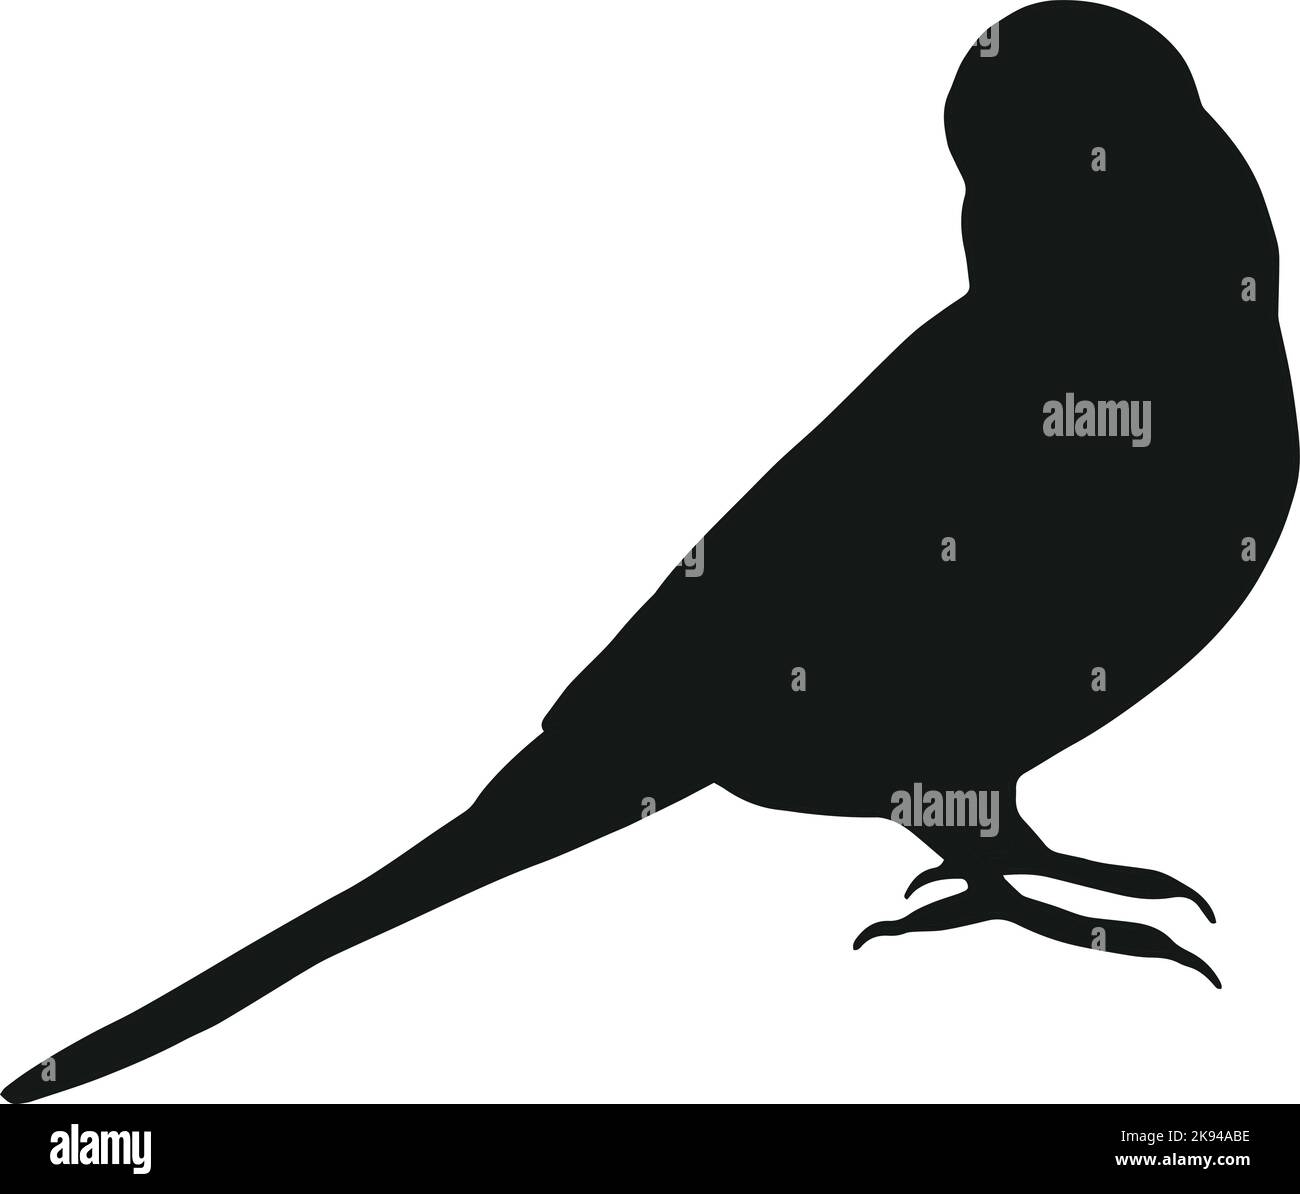 Budgie silhouette isolated on white background. Black hand drawn vector art of a pet bird. Simple vector illustration of an animal Stock Vector